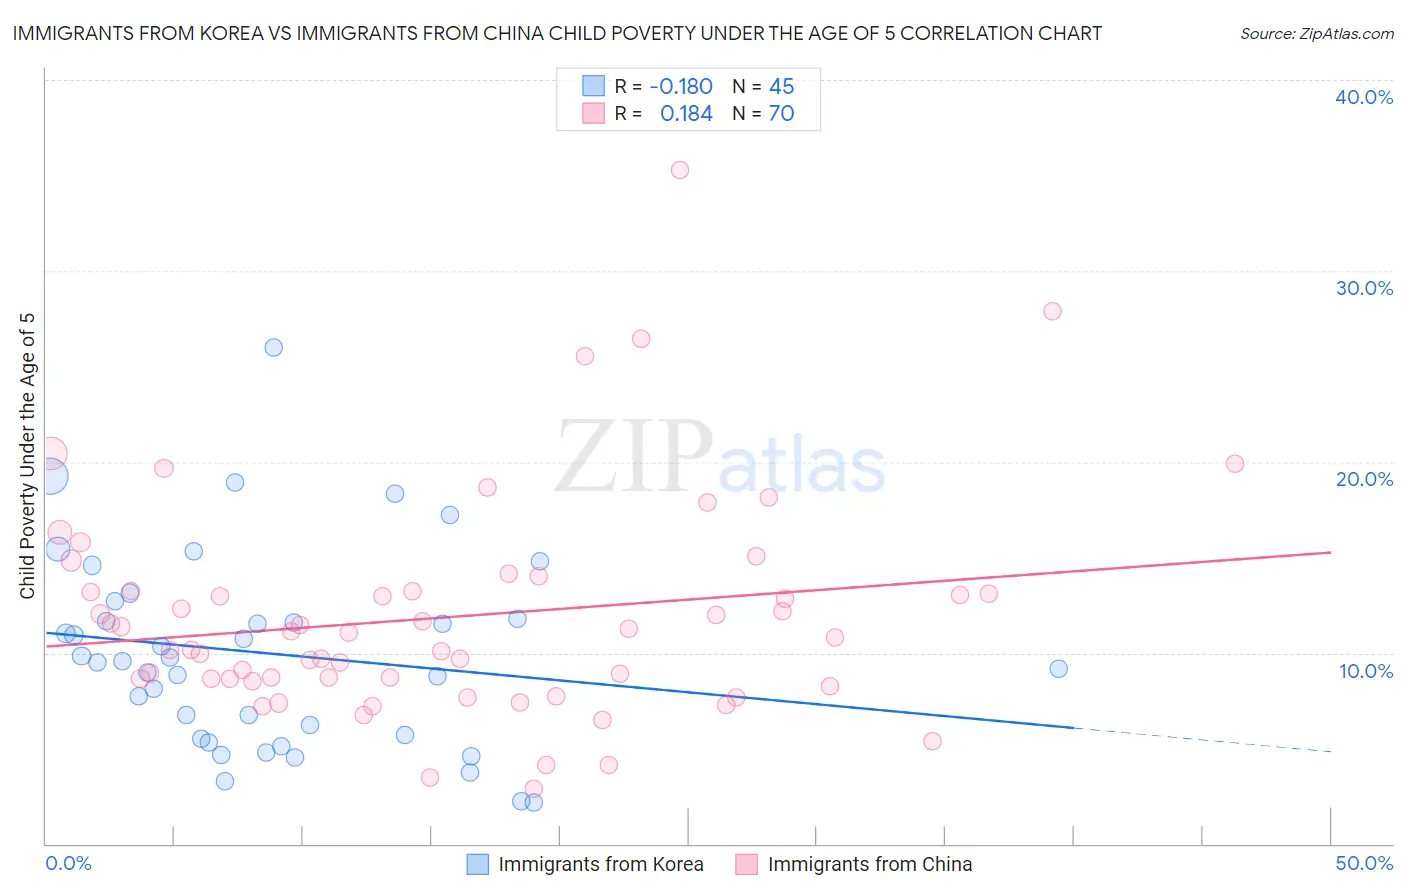 Immigrants from Korea vs Immigrants from China Child Poverty Under the Age of 5